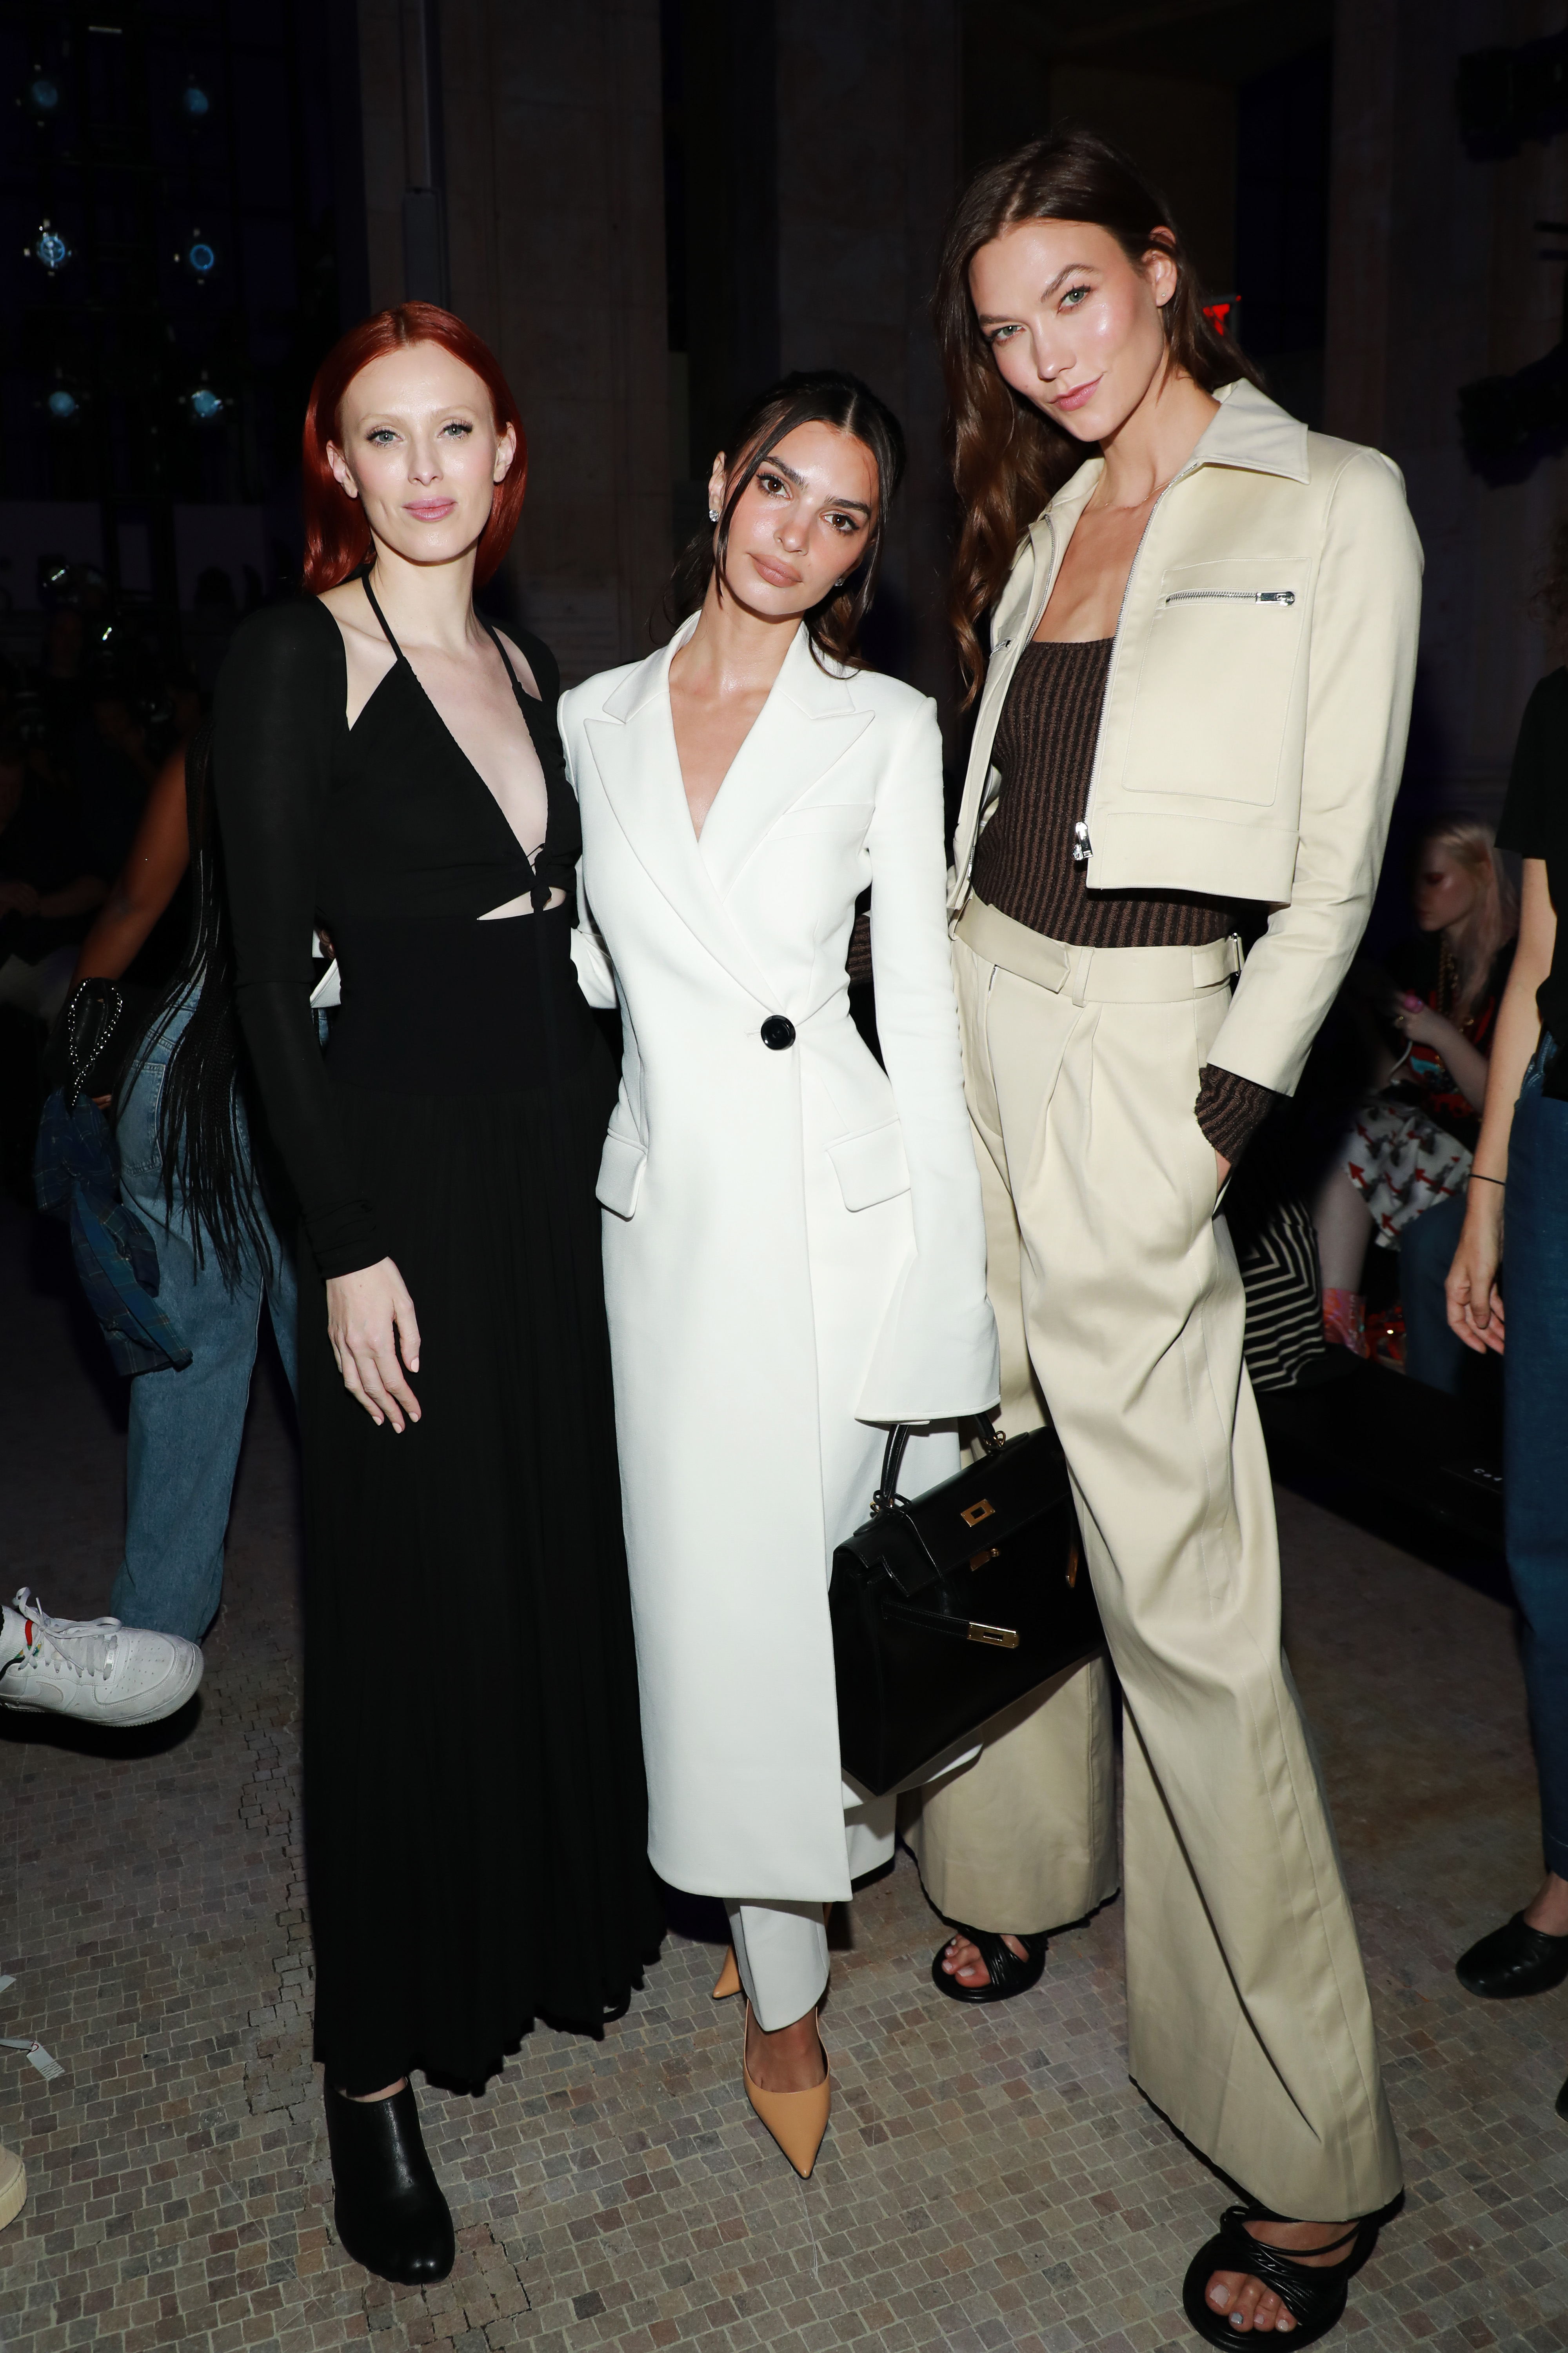 Karen Elson, Emily Ratajkowski, Karlie Kloss attend the Proenza Schouler fashion show during September 2022 New York Fashion Week: The Shows at Hall Des Lumieres on September 09, 2022 in New York City.